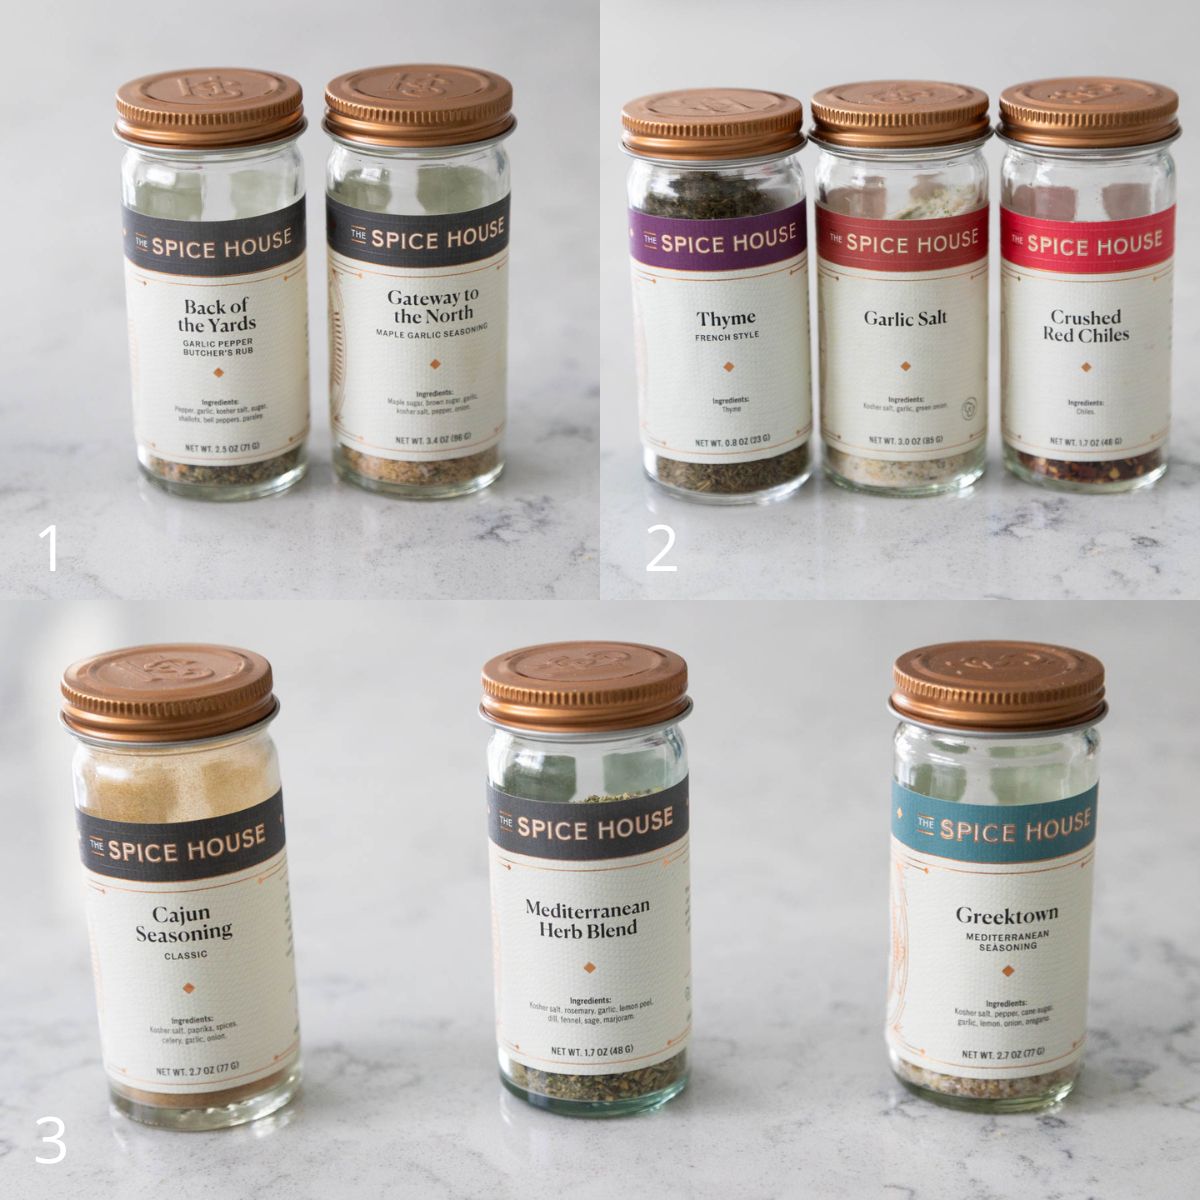 The photo collage shows several different seasoning blends to use for pork tenderloins.